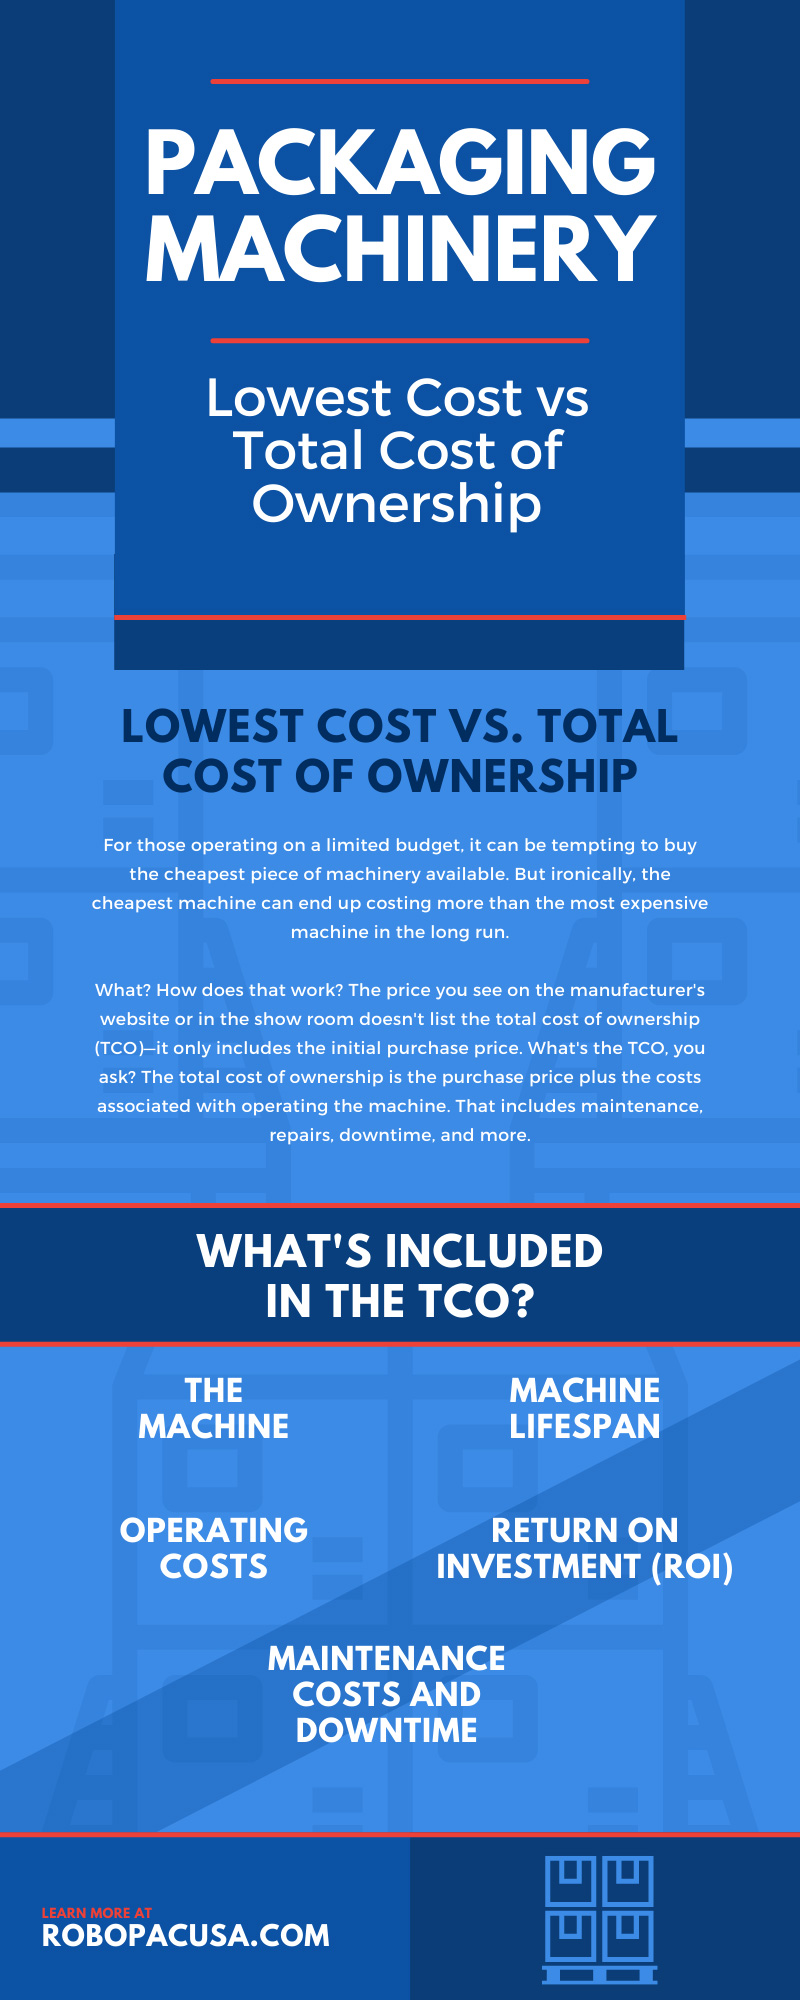 Packaging Machinery: Lowest Cost vs Total Cost of Ownership